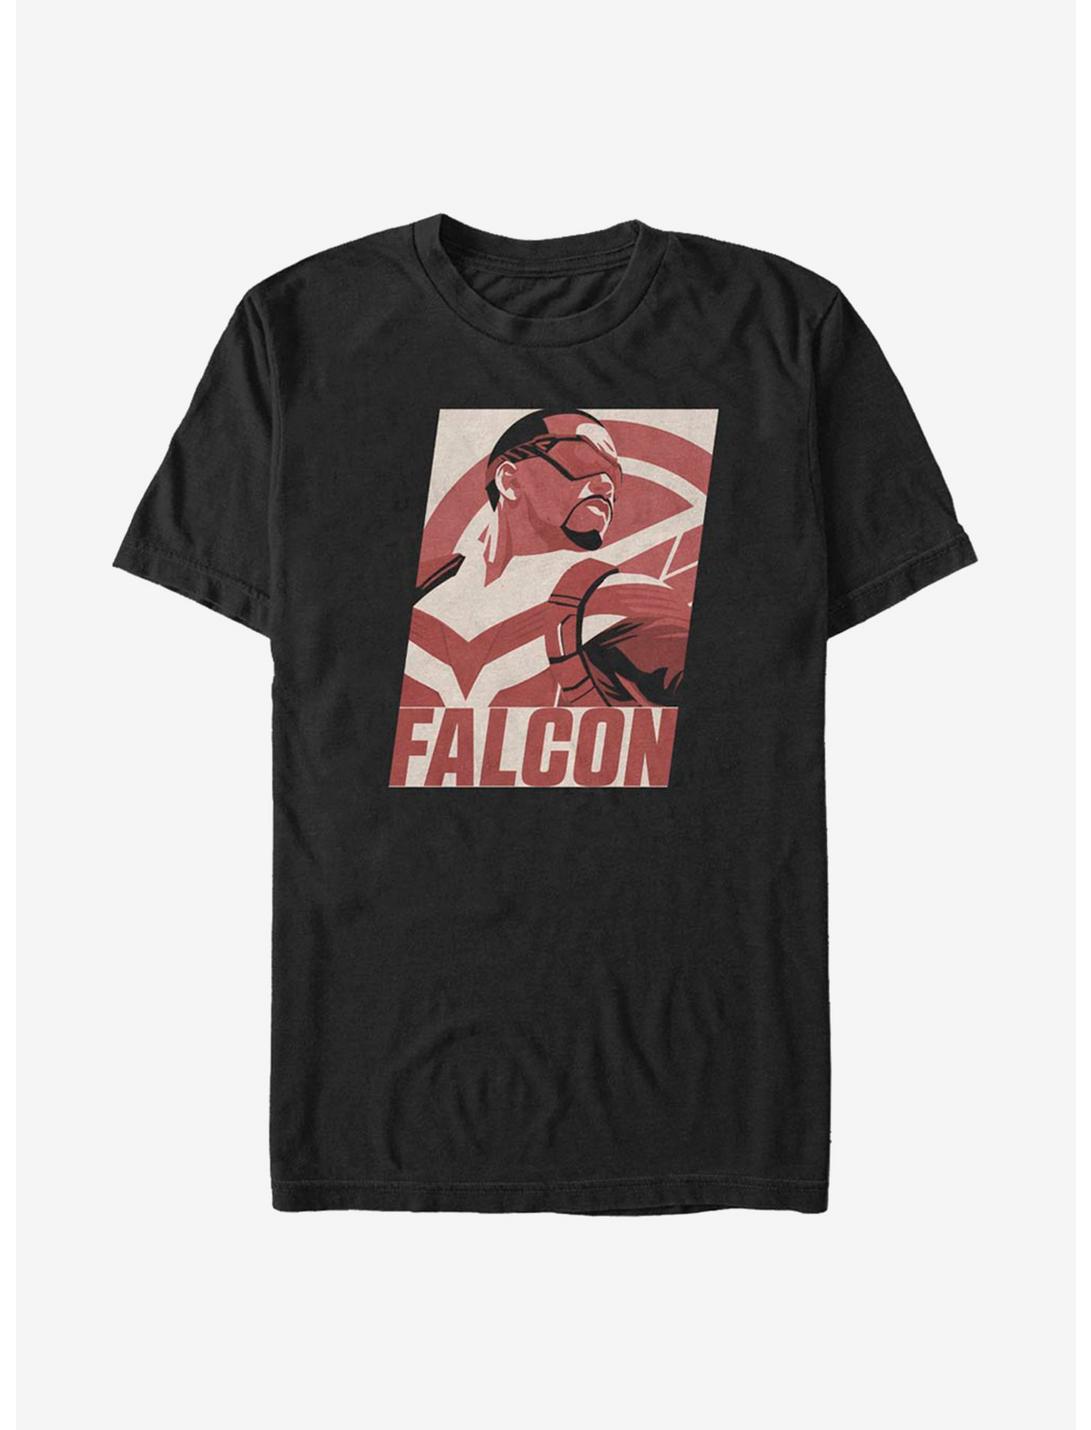 Marvel The Falcon And The Winter Soldier Falcon Poster T-Shirt, BLACK, hi-res